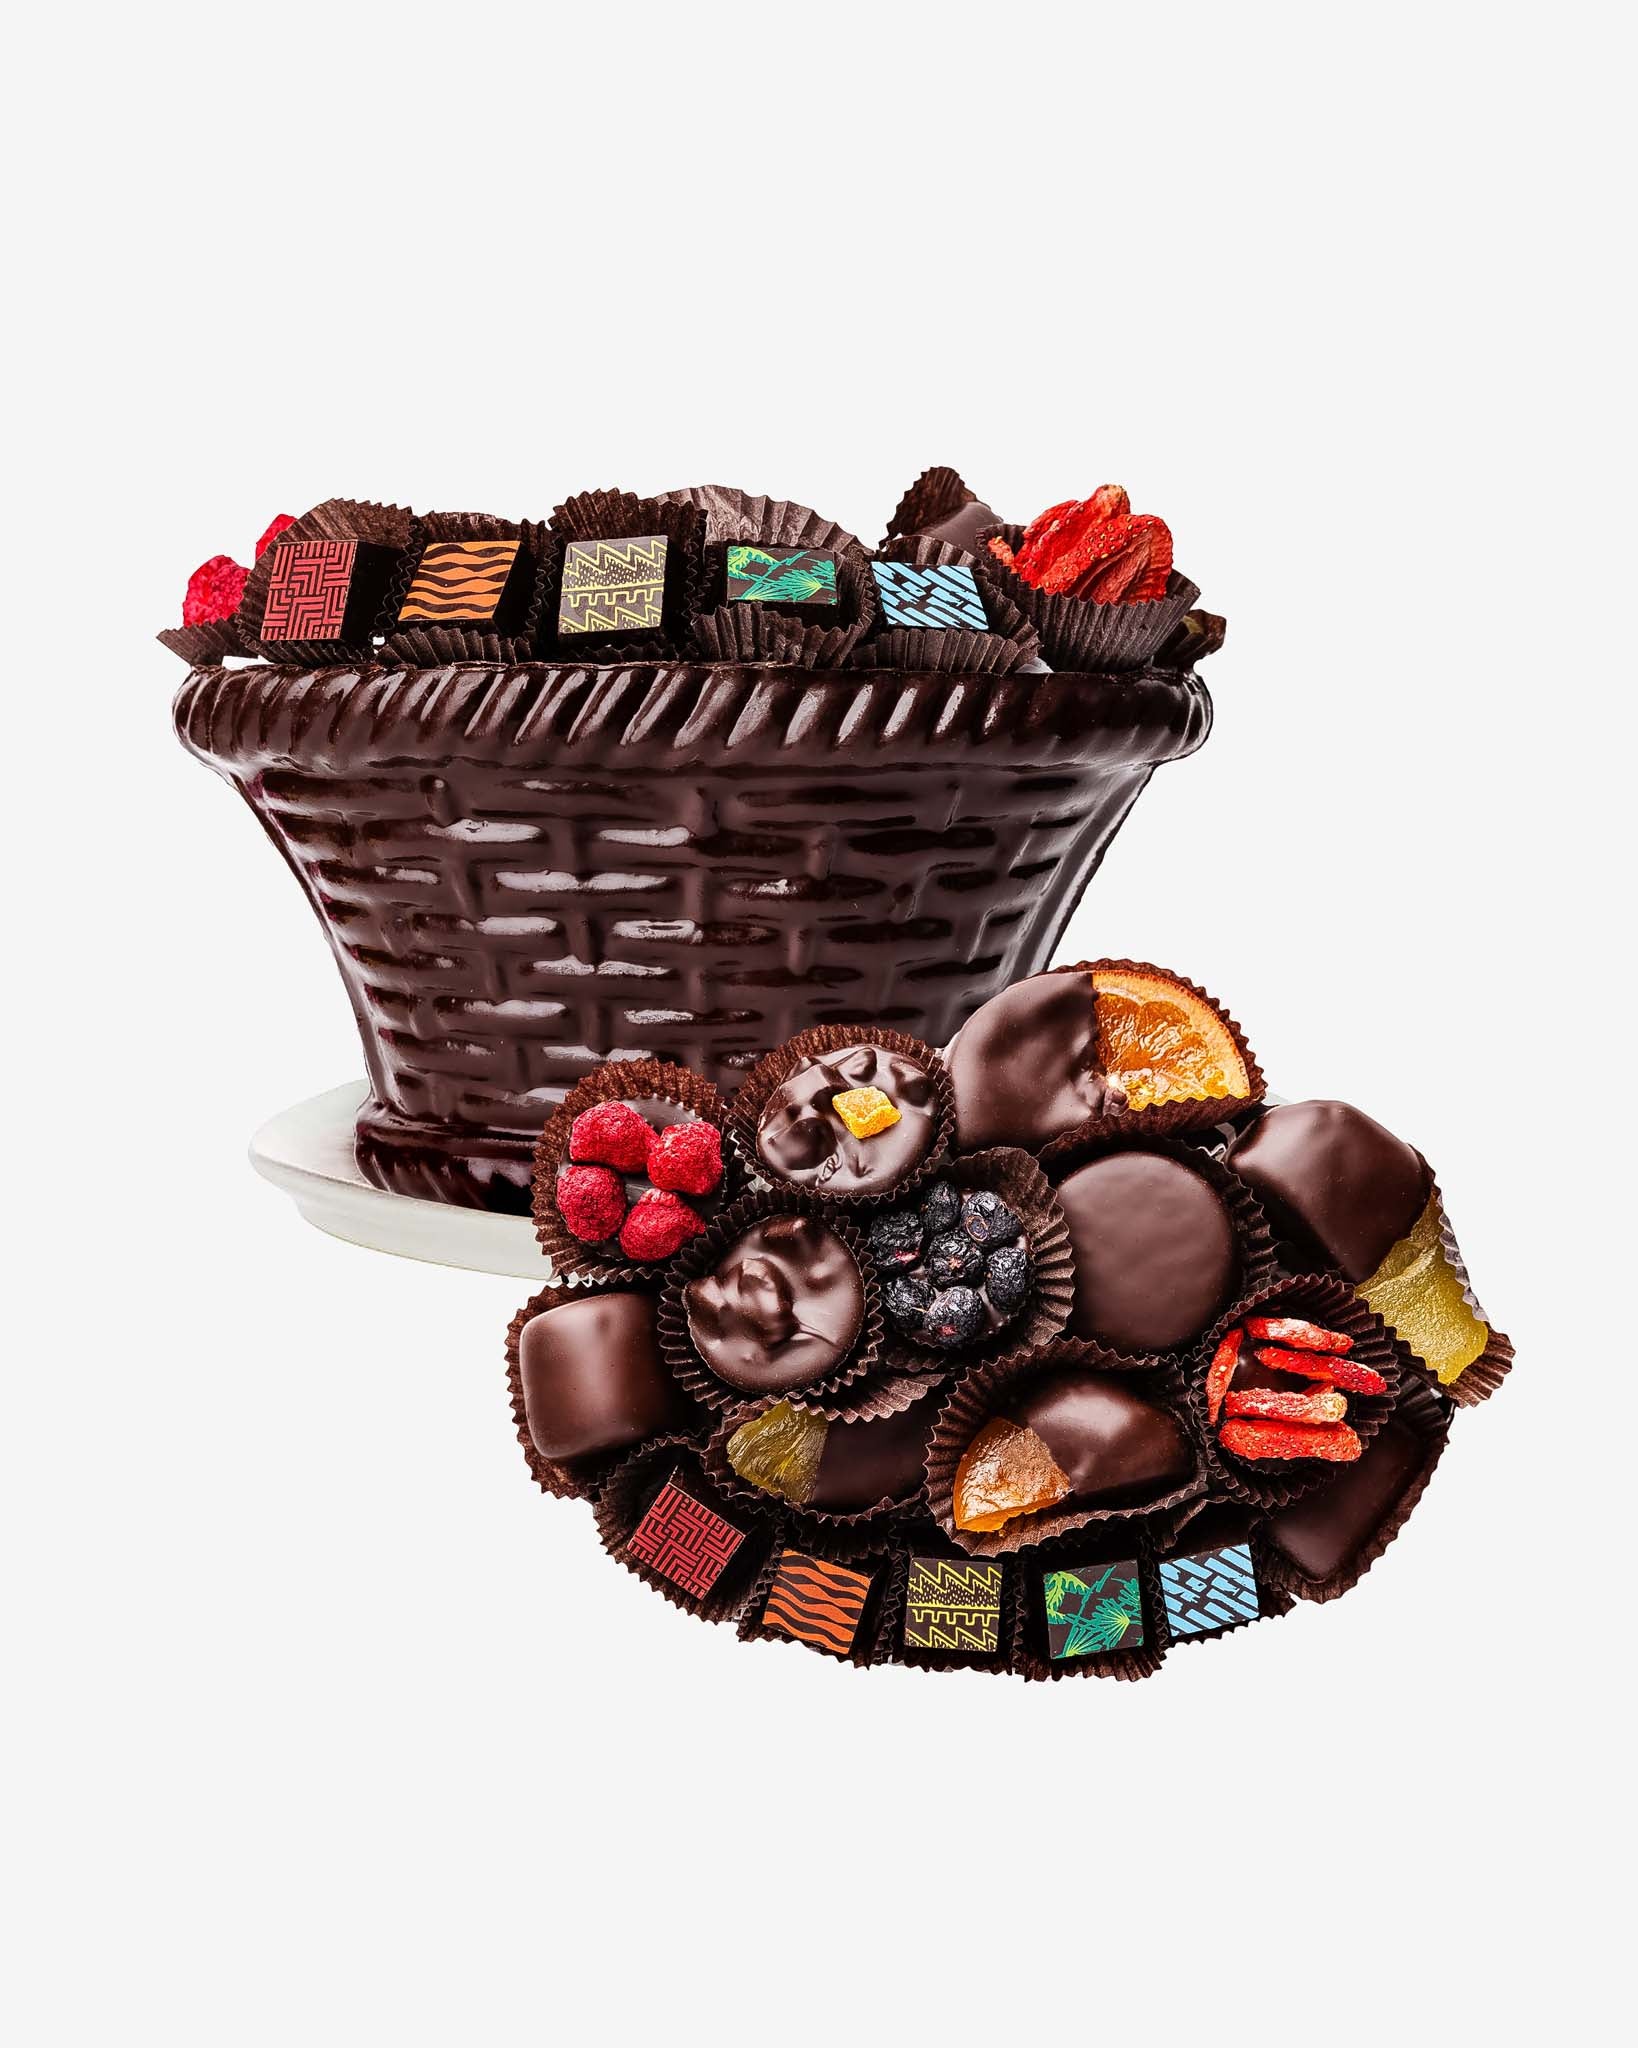 Compartes Luxury Chocolate Gifts - Dark Chocolate Gift Basket - Made out of Chocolate